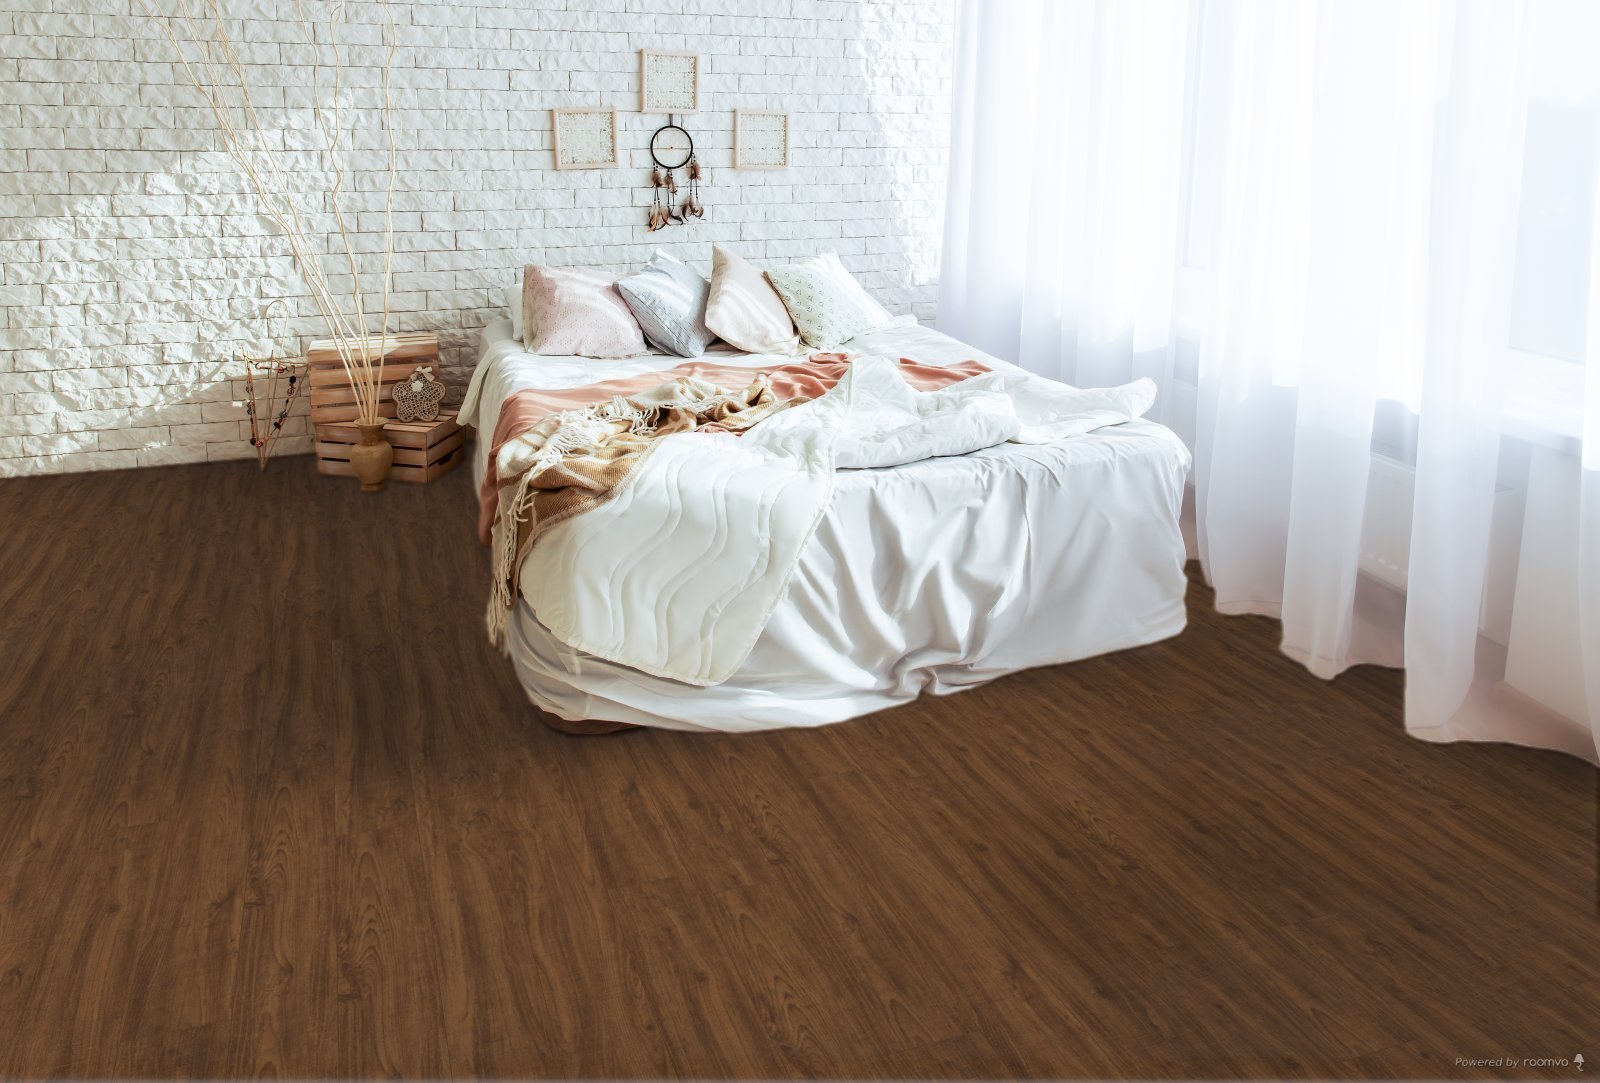 Horizen Flooring presents to you a picture of a quality wide plank Gunstock luxury vinyl plank. NovoCore Premium collection features a wide range of colors & designs that will compliment any interior. Natural wood grain synchronized surface allow for an authentic hardwood look & feel. This collection features a 0.25″ / 6.5 mm overall thickness and a durable 22 mil / 0.55 mm wear layer for residential and commercial applications.